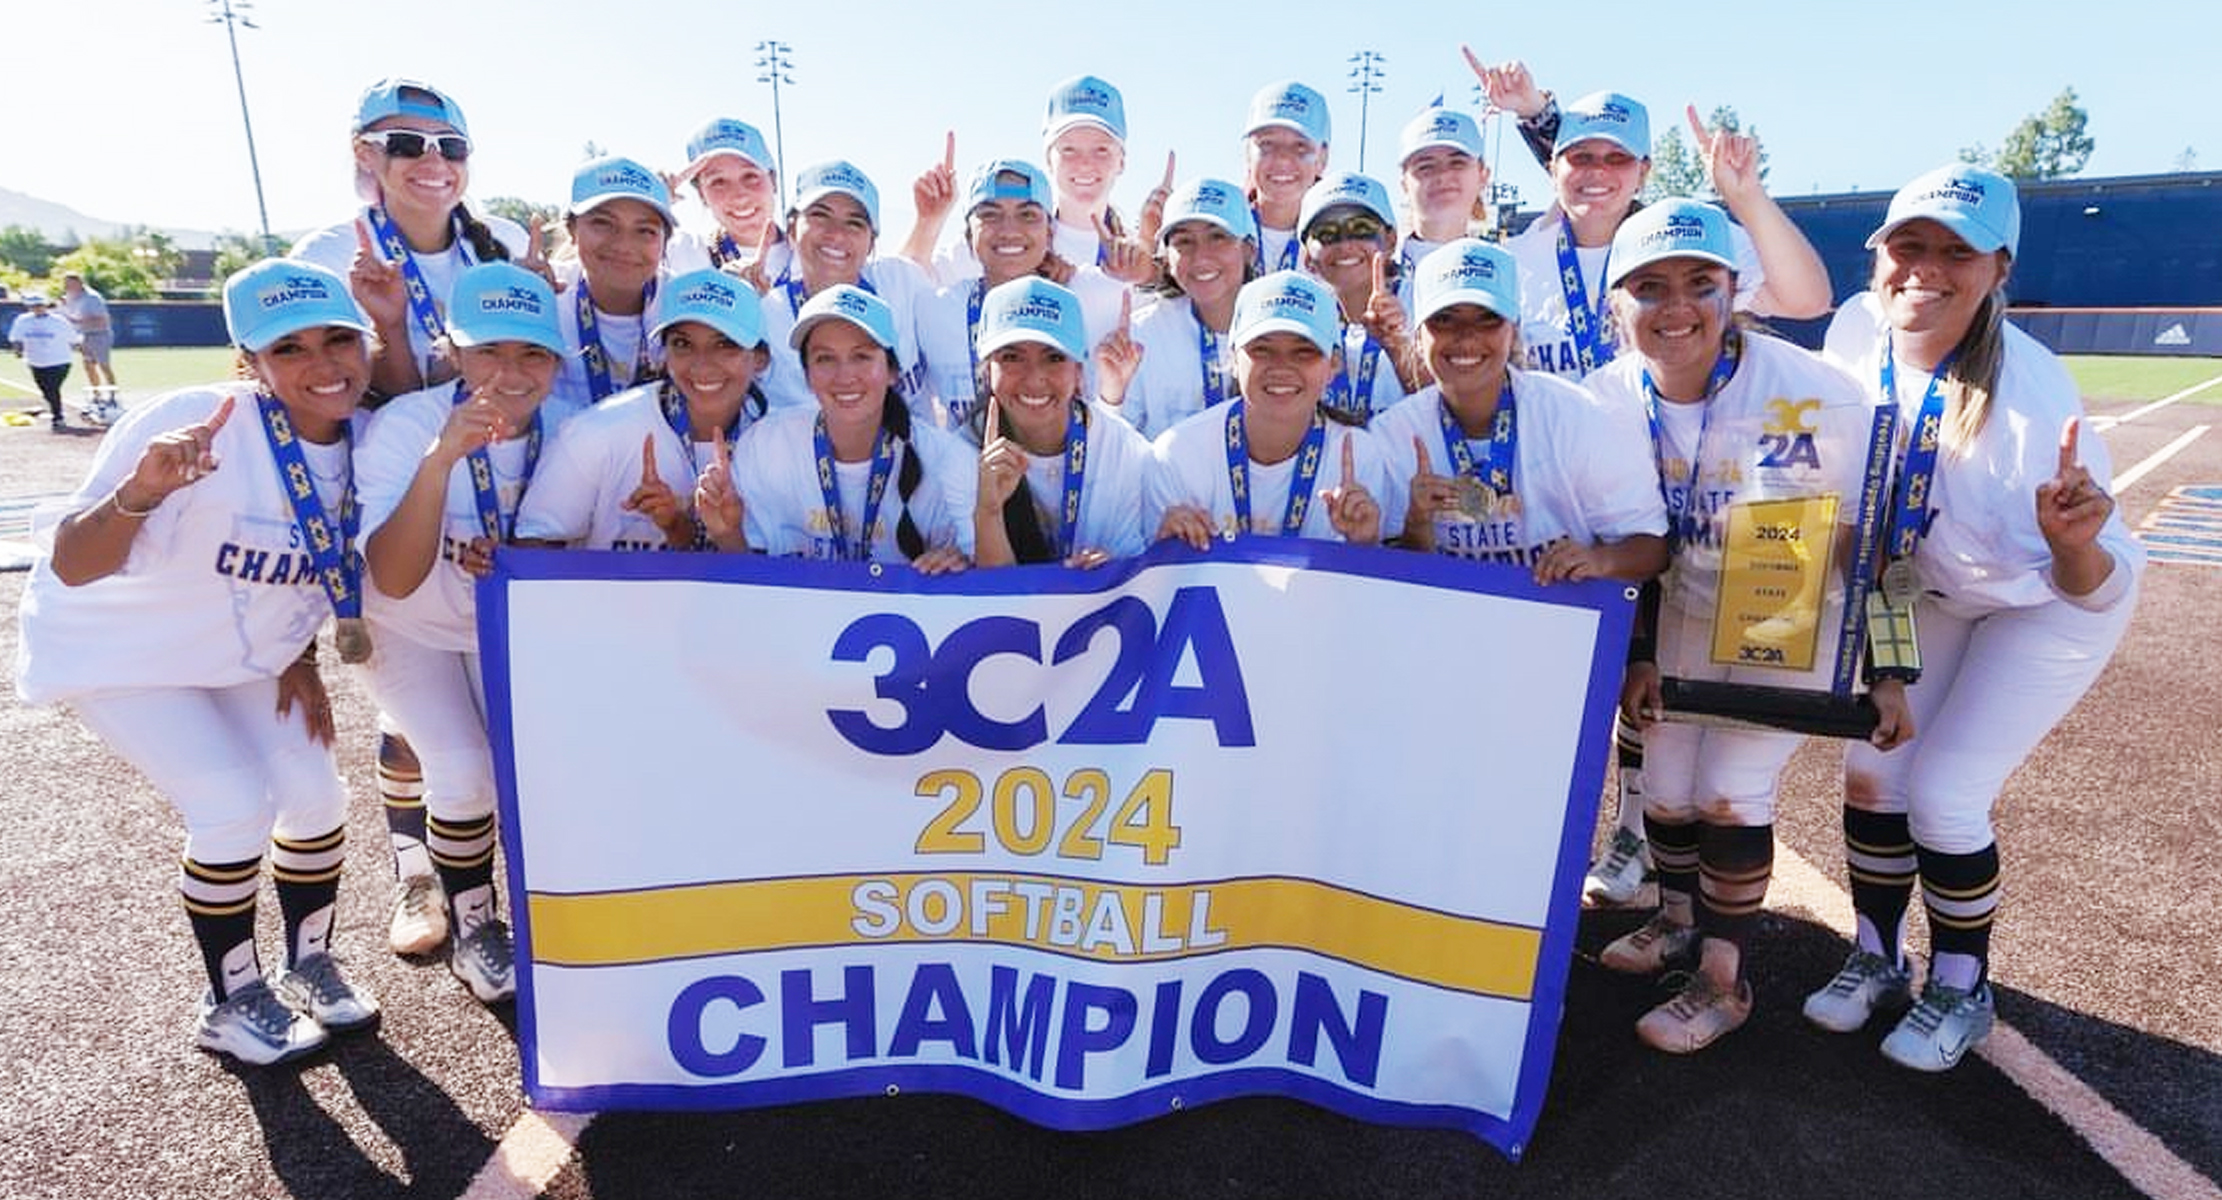 FULLERTON COLLEGE, YOUR 2024 3C2A STATE CHAMPIONS!!!